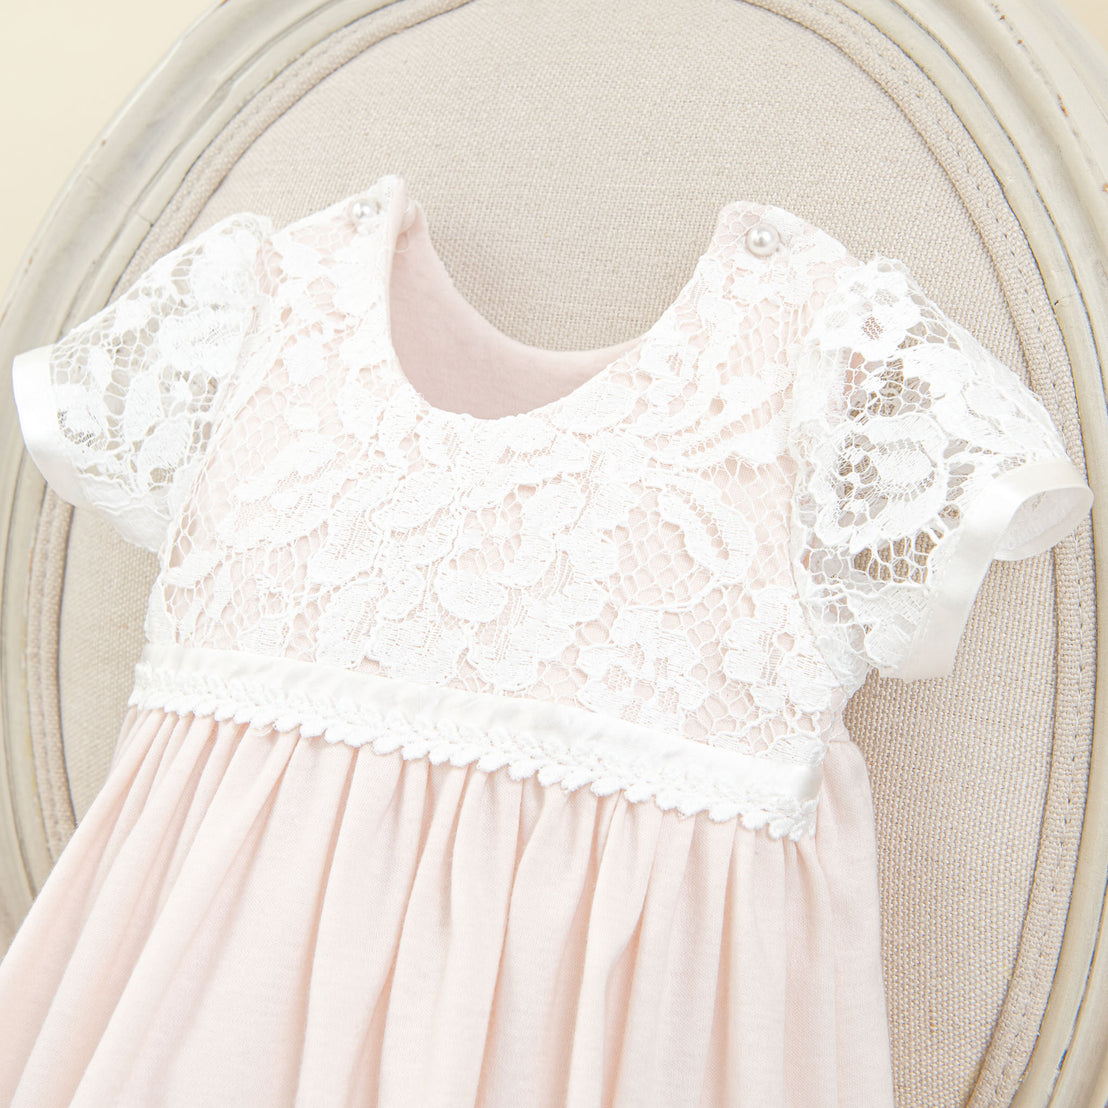 A pink Rose Layette & Bonnet dress with a delicate white lace upper and traditional cap sleeves, displayed elegantly as an heirloom on a beige antique chair.